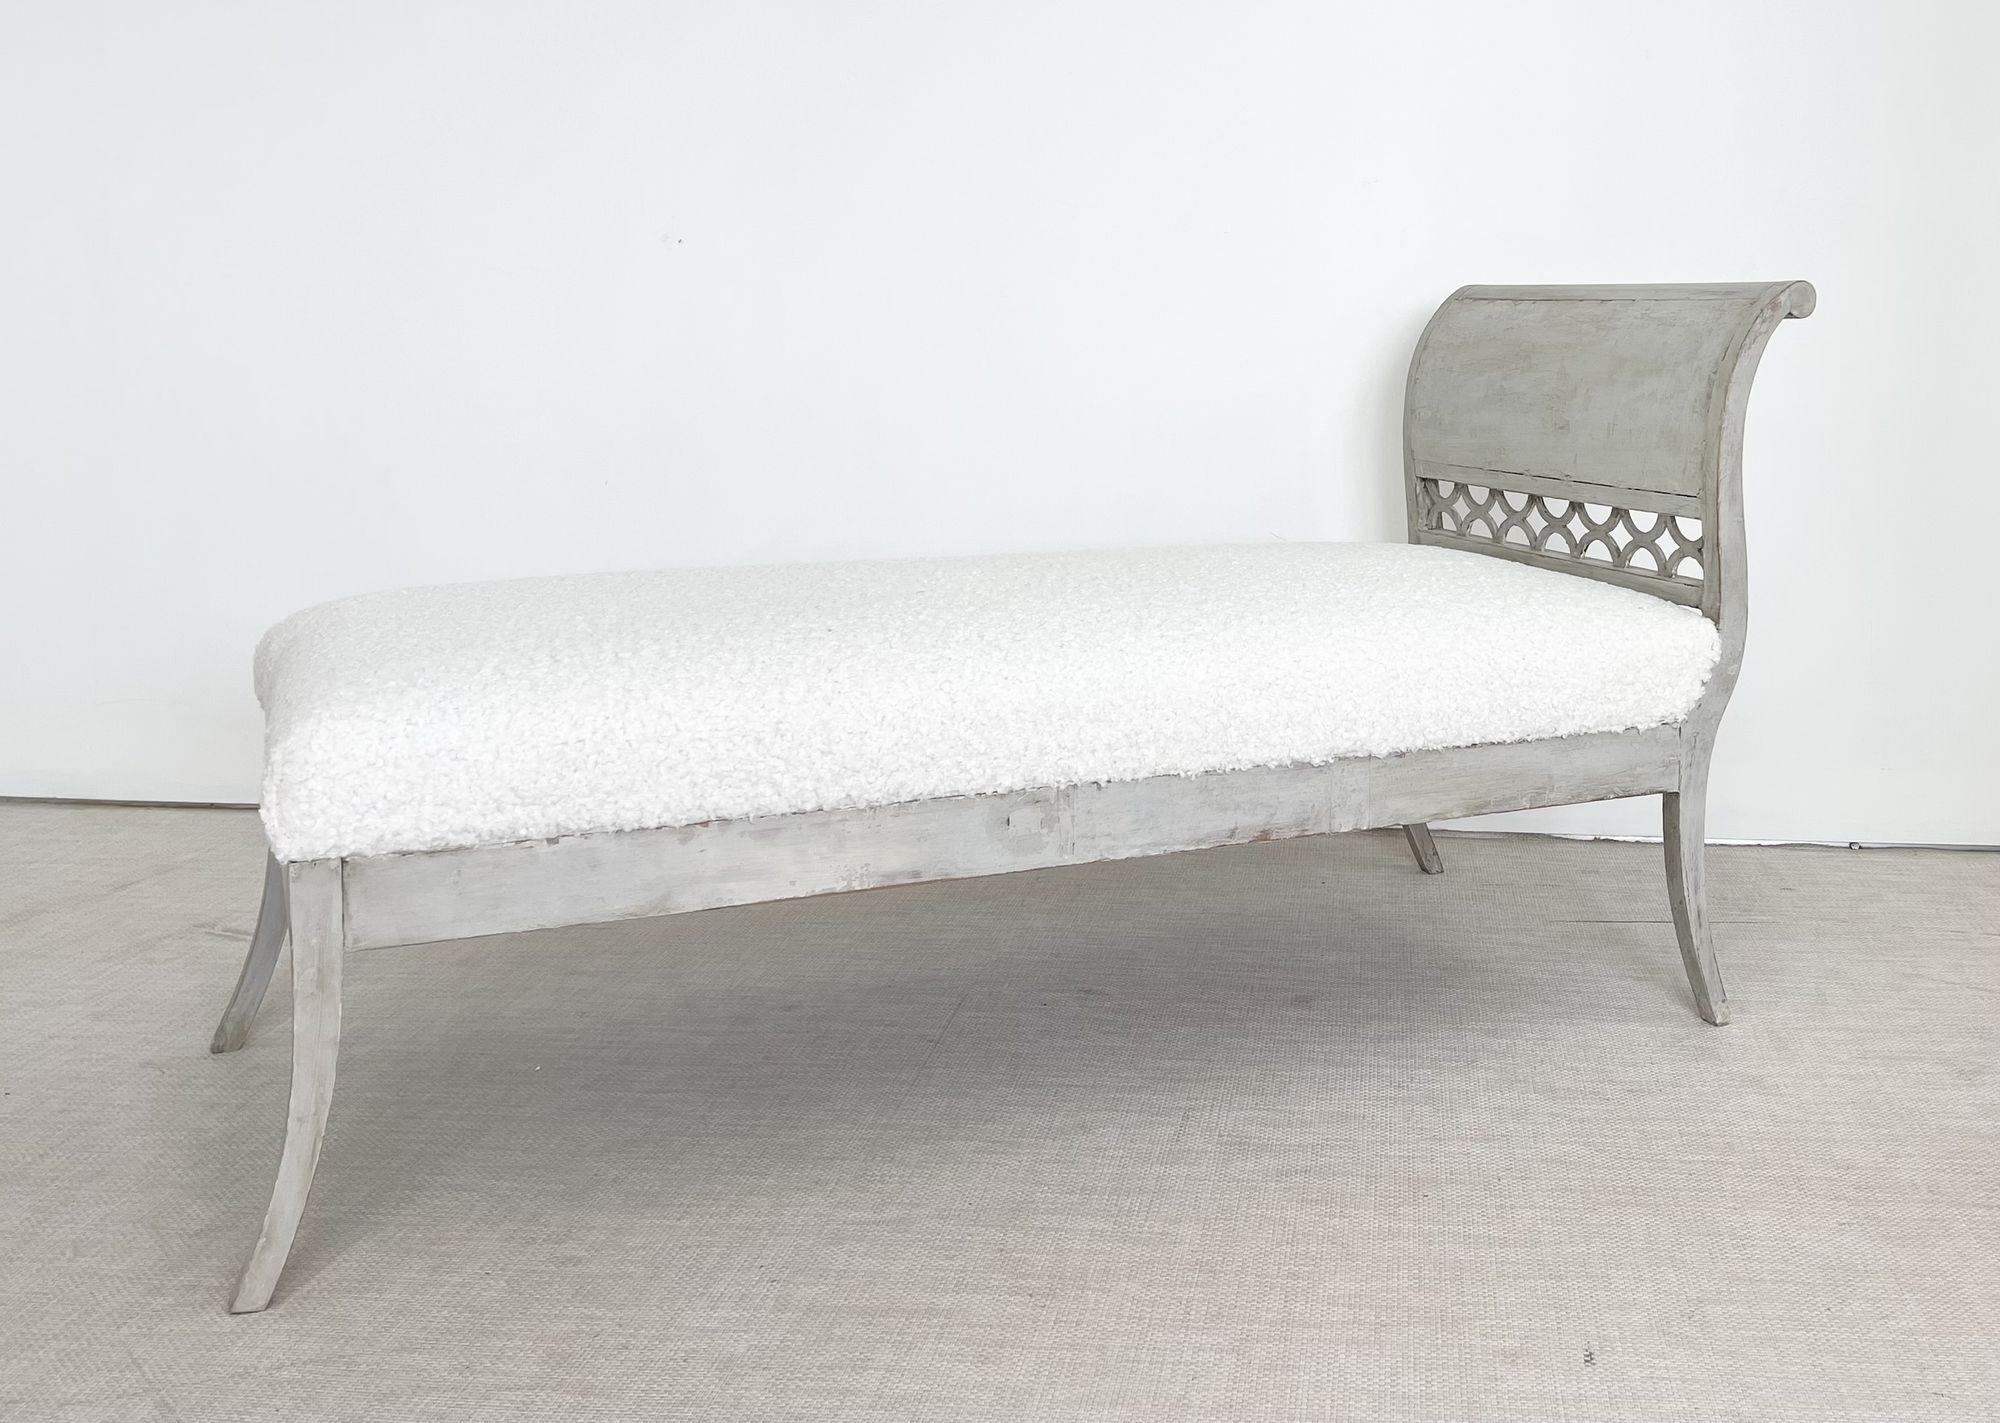 18th / 19th century Gustavian daybed, chaise lounge, Swedish paint distressed, new wool upholstery
 
A fine example of Gustavian home furnishings. The large daybed in fine condition having a peireced backrest on sprayed legs. 
 
Original Paint,